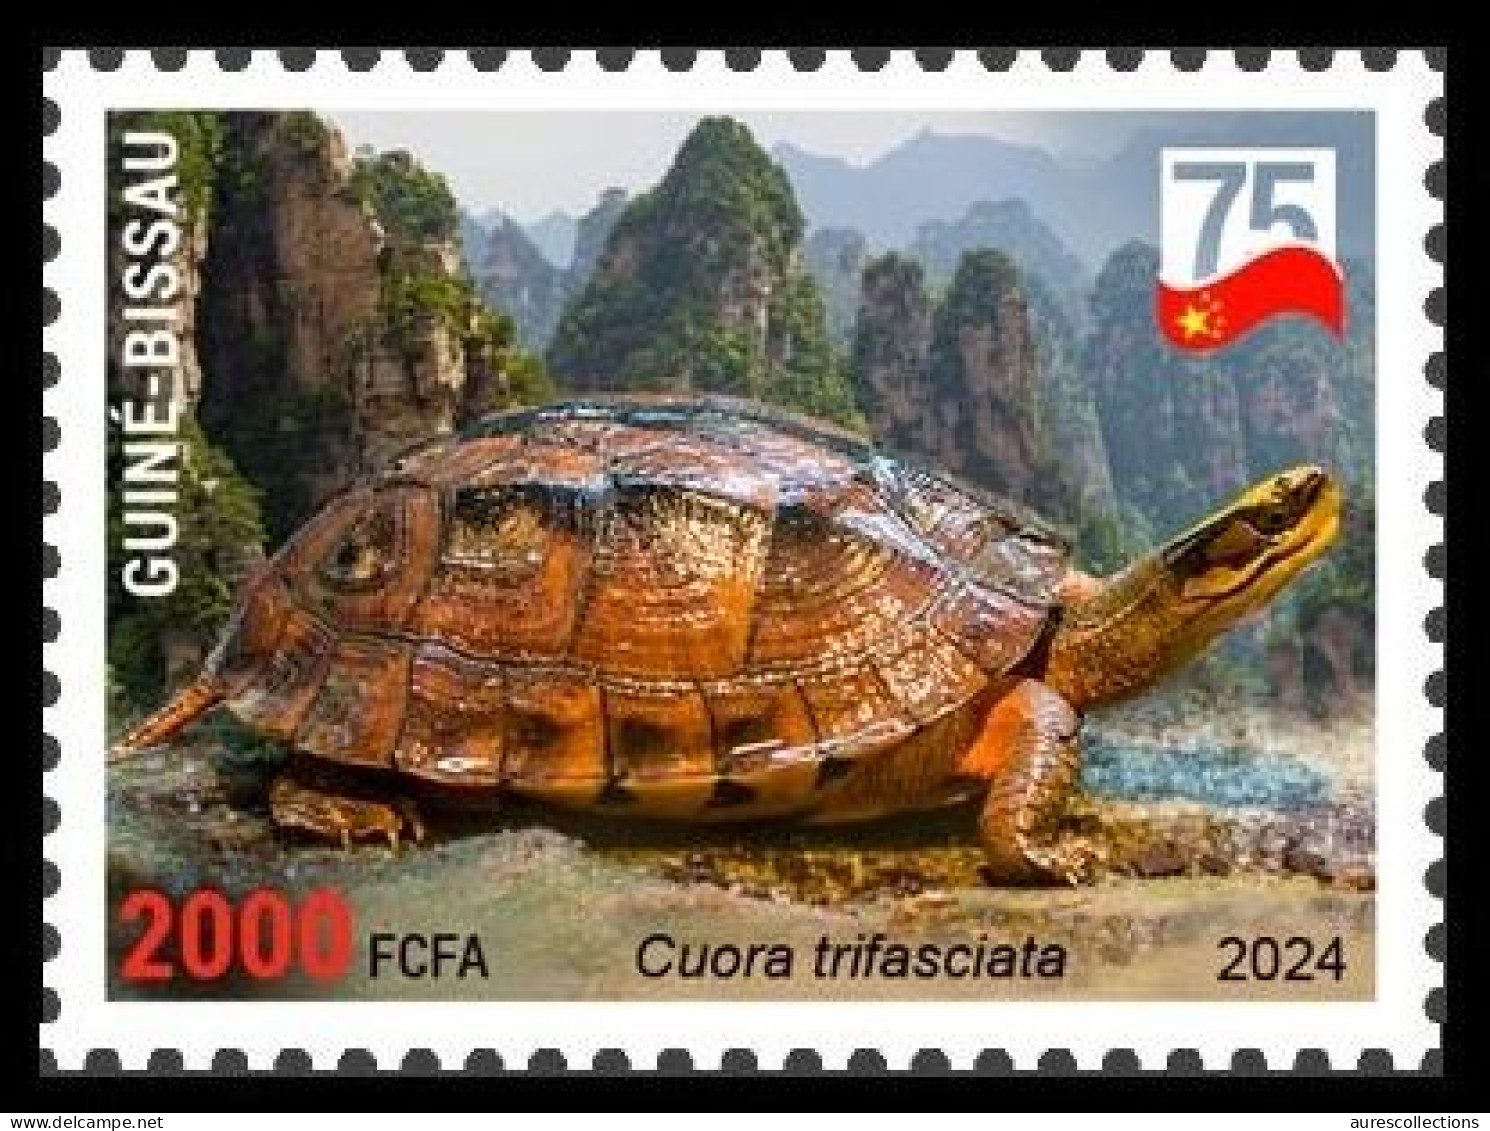 GUINEA BISSAU 2024 STAMP 1V - CHINA AMPHIBIANS & REPTILES - GOLDEN COIN TURTLE TURTLES TORTUES - CHINA 75 ANNIV. - MNH - Schildpadden